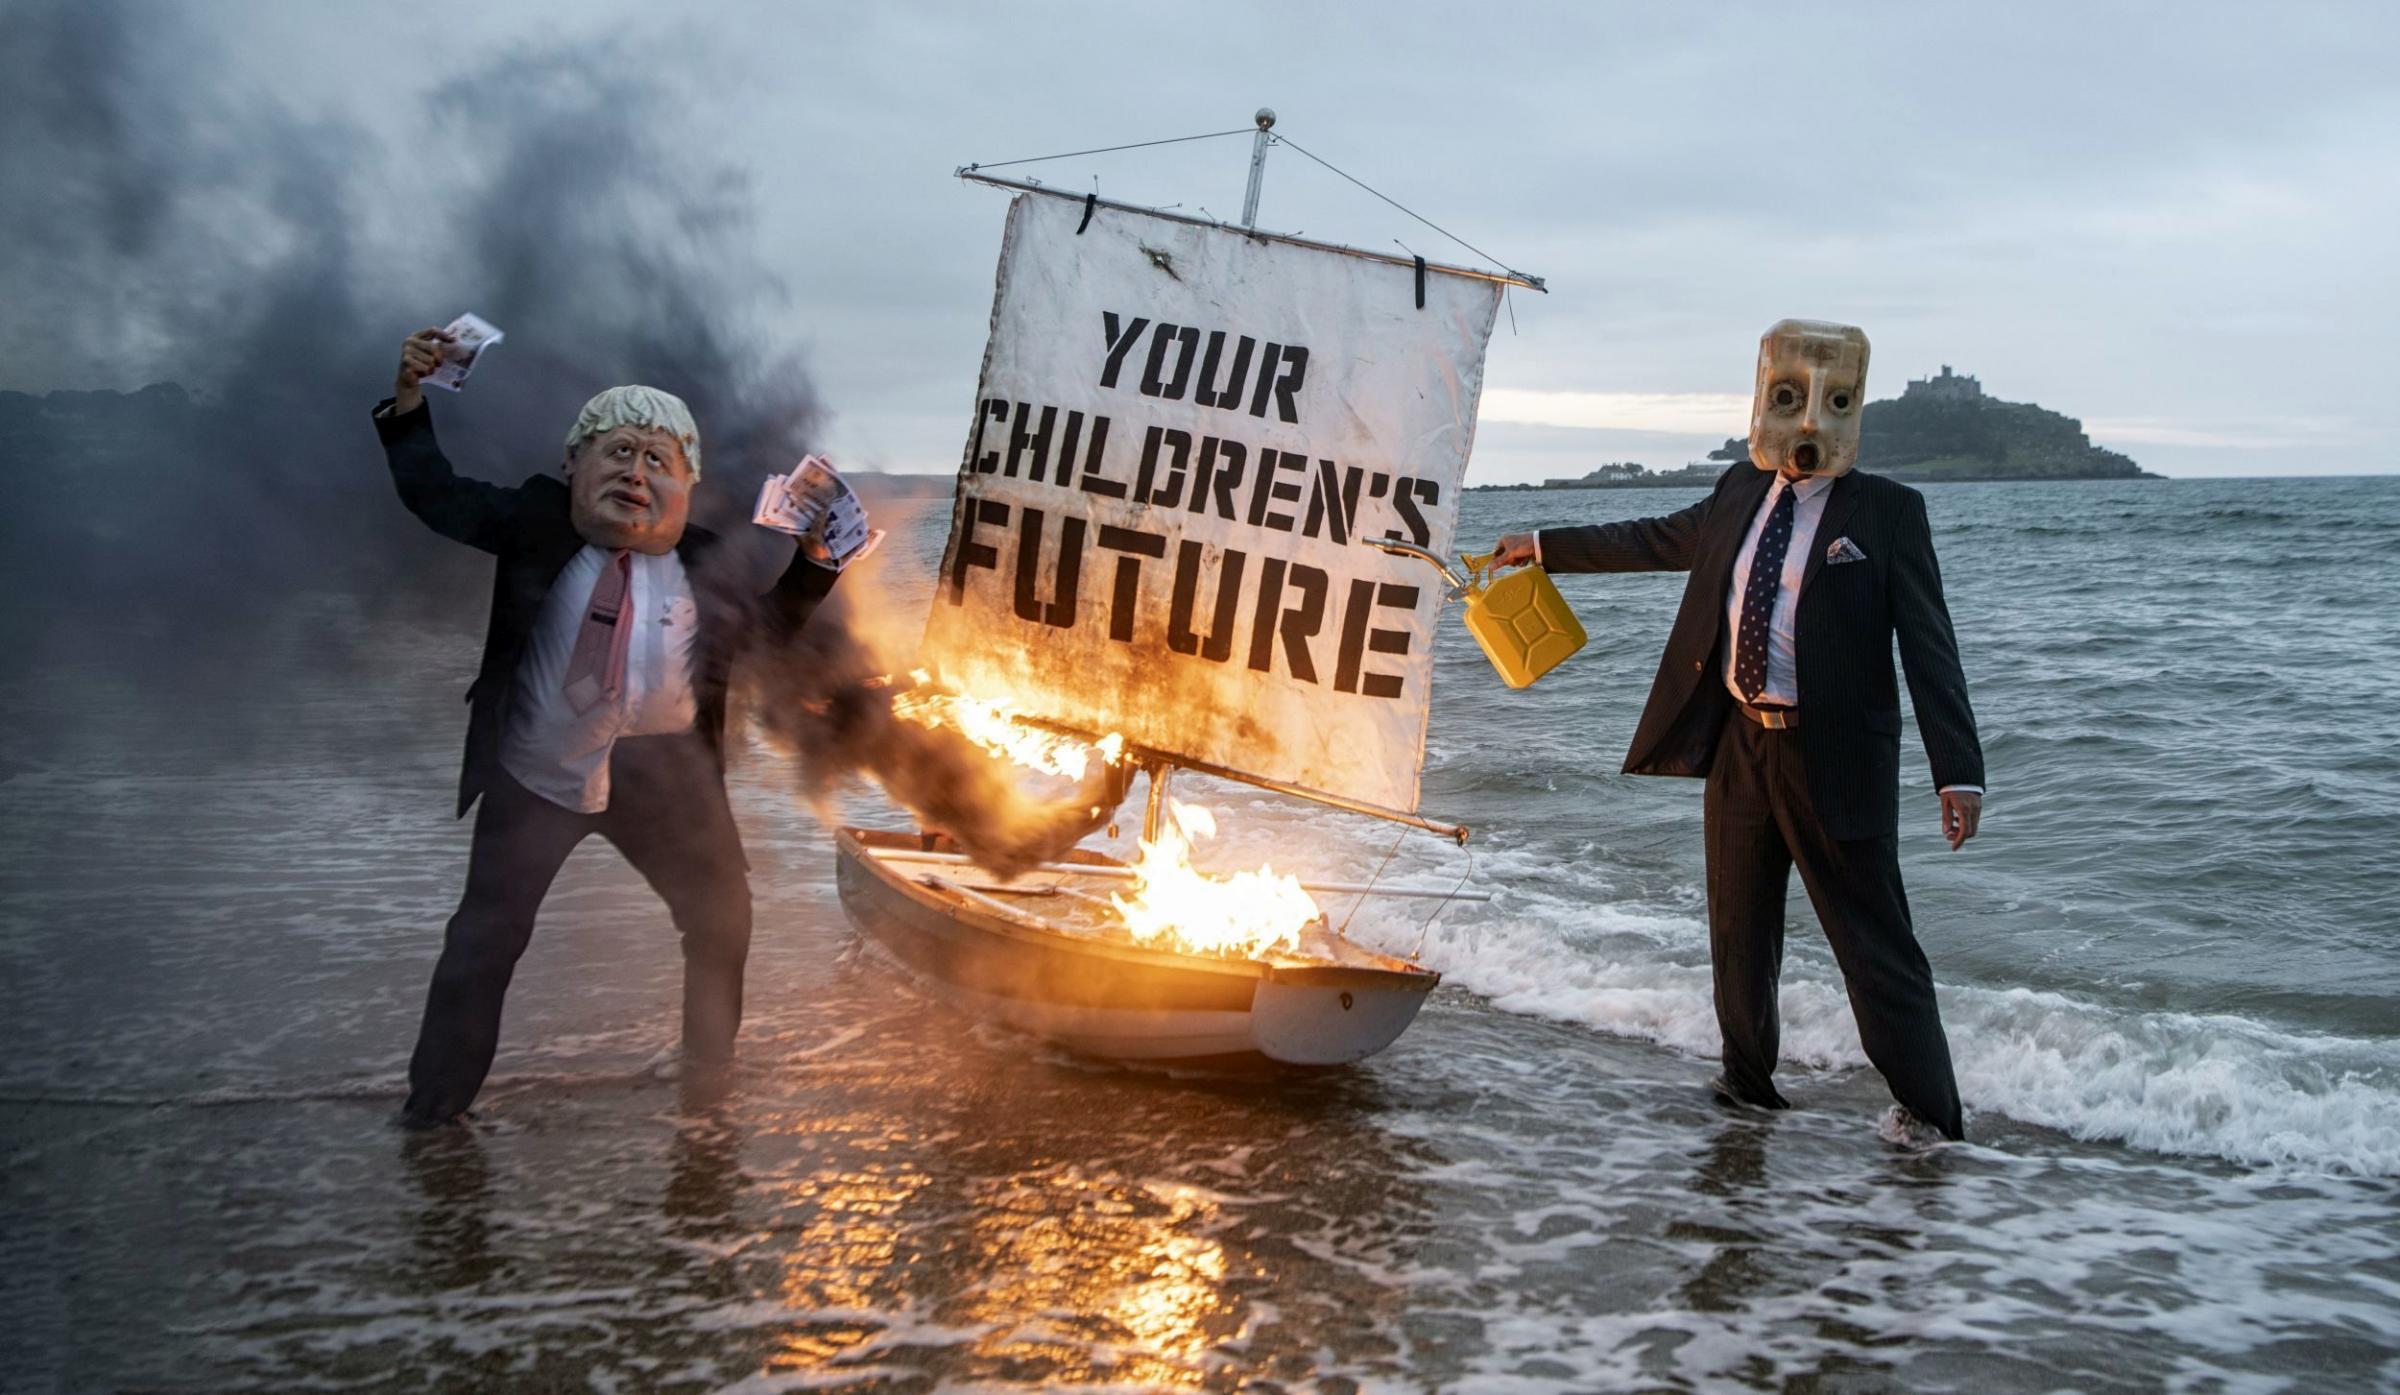 A boat with the words Your childrens future burns in the protest. Picture: Guy Reece